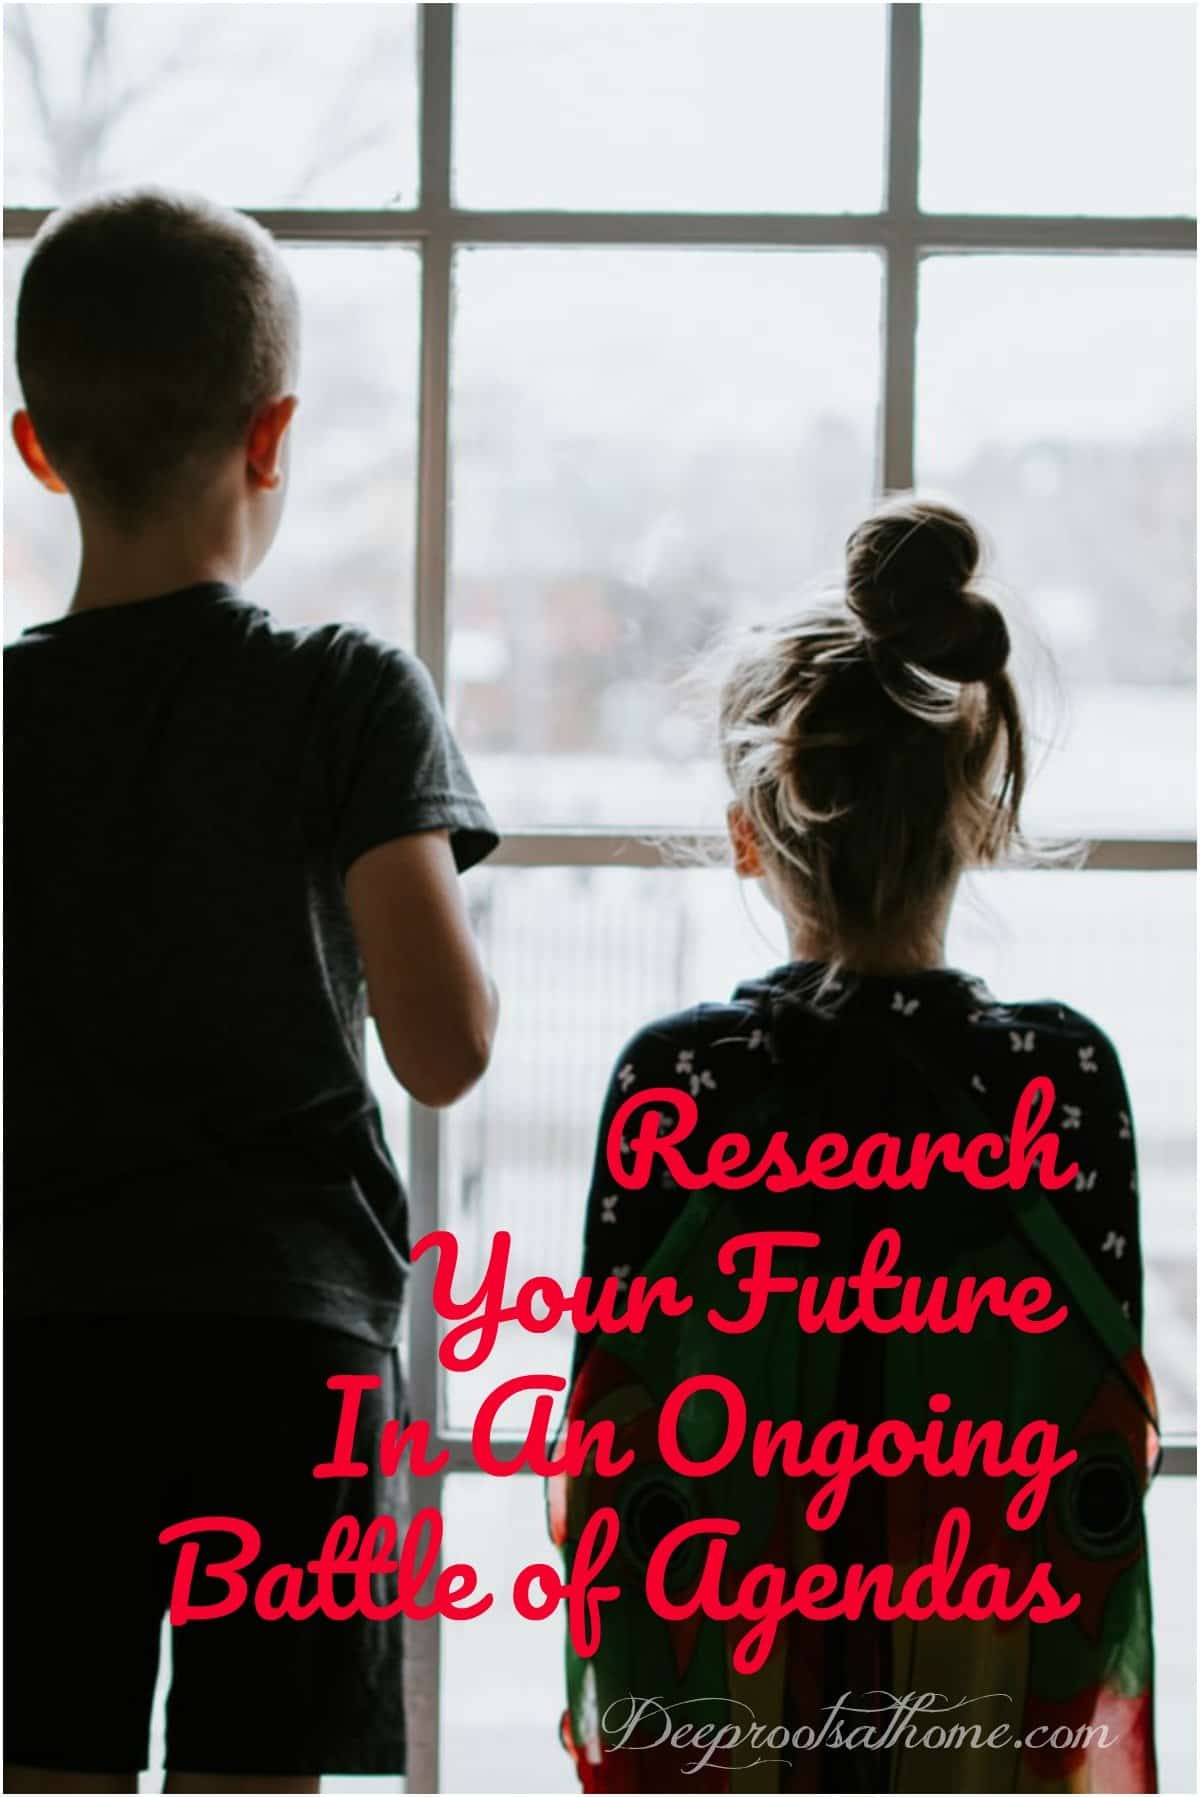 Research Your Future In An Ongoing Battle of Agendas